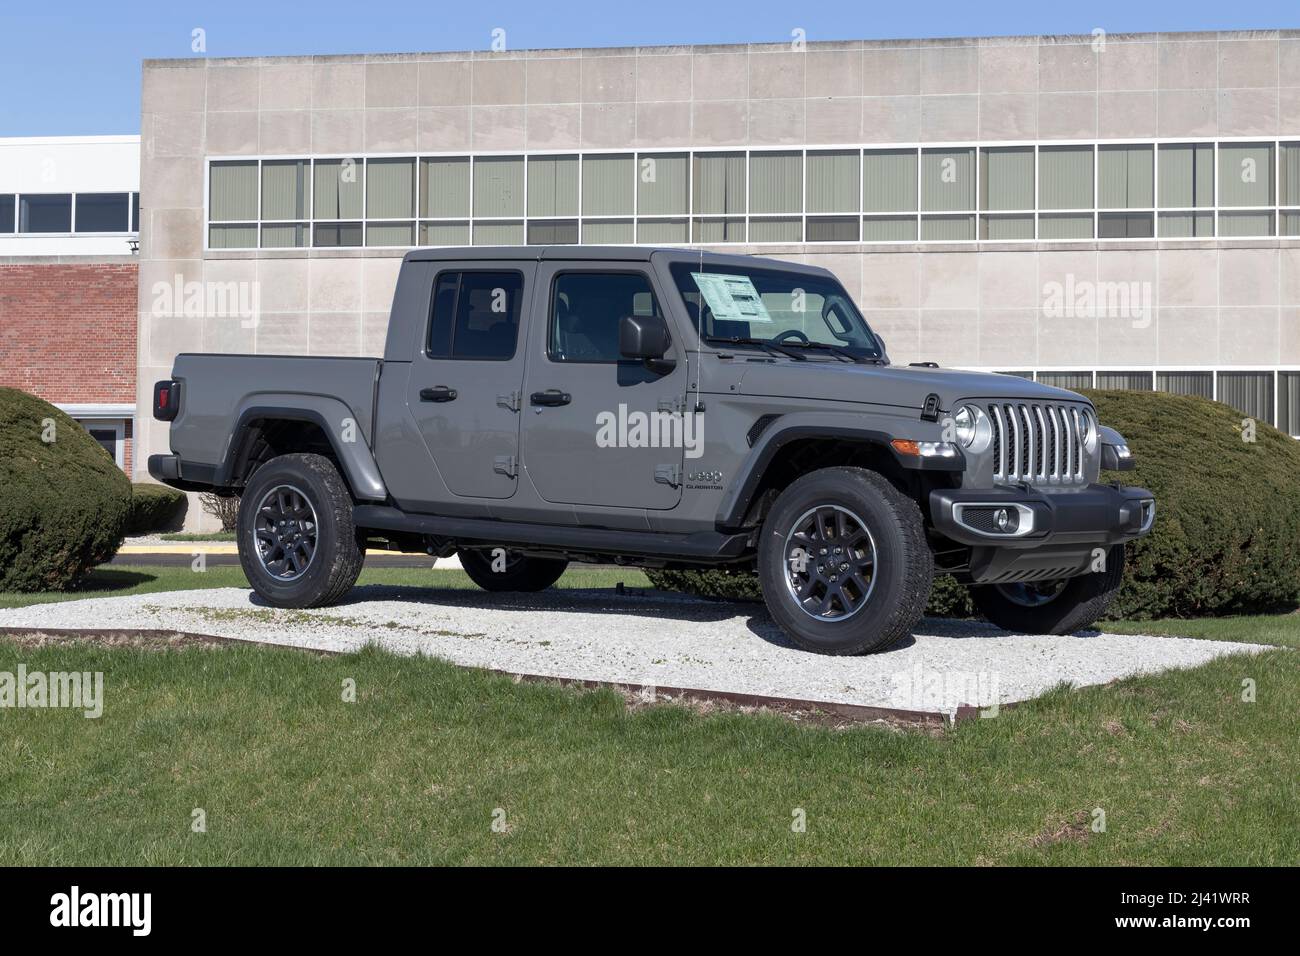 Kokomo - Circa April 2022: Jeep Gladiator display at the transmission plant. The Jeep Gladiator models include the Sport, Willys, Rubicon and Mojave. Stock Photo